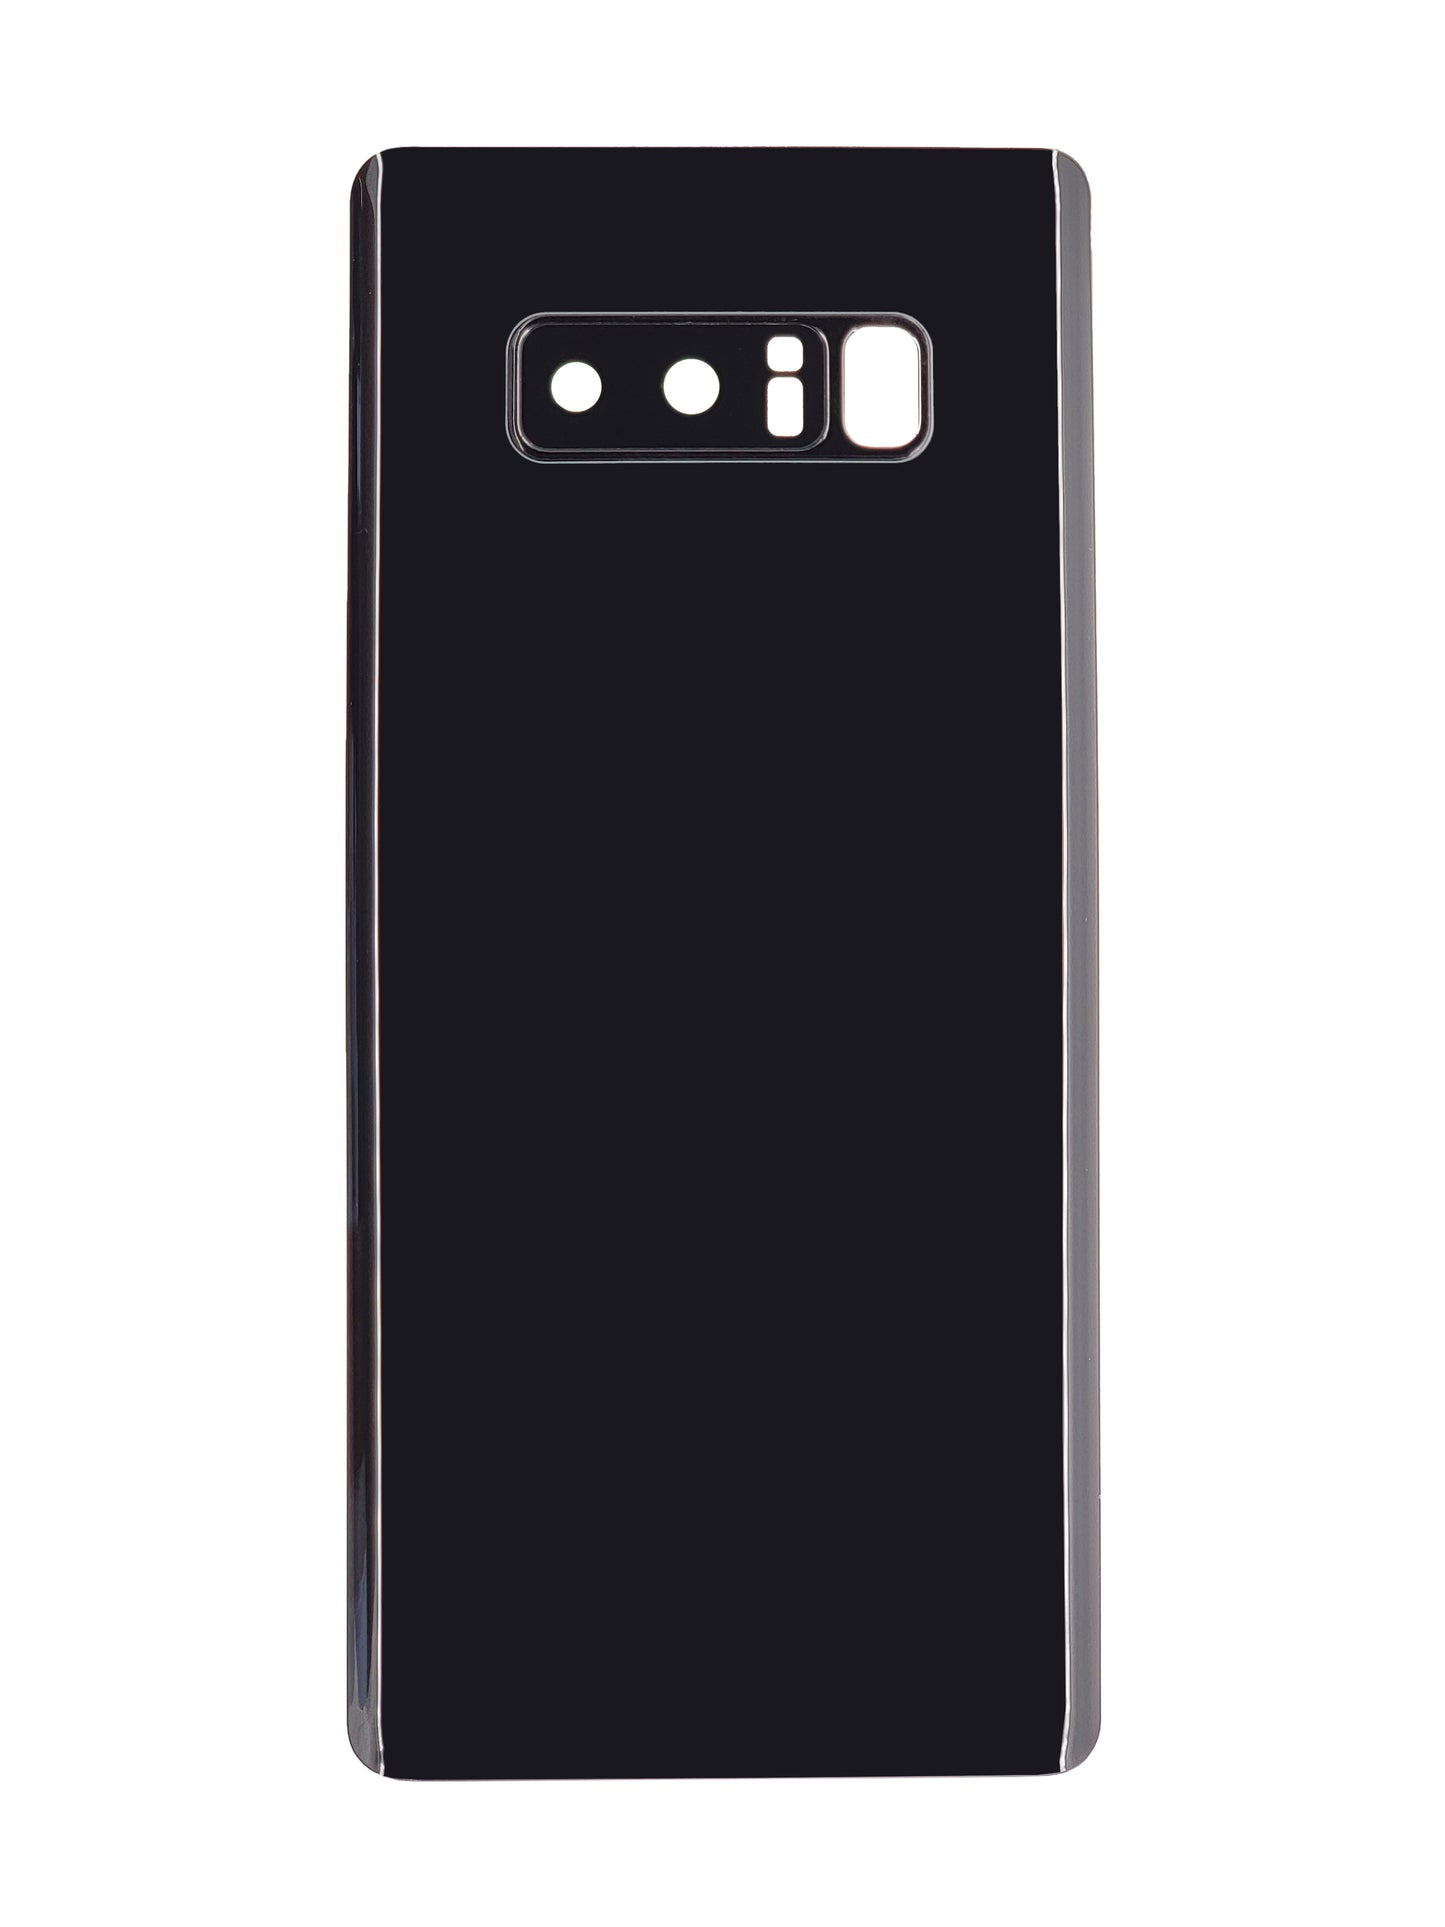 SGN Note 8 Back Cover (Black)